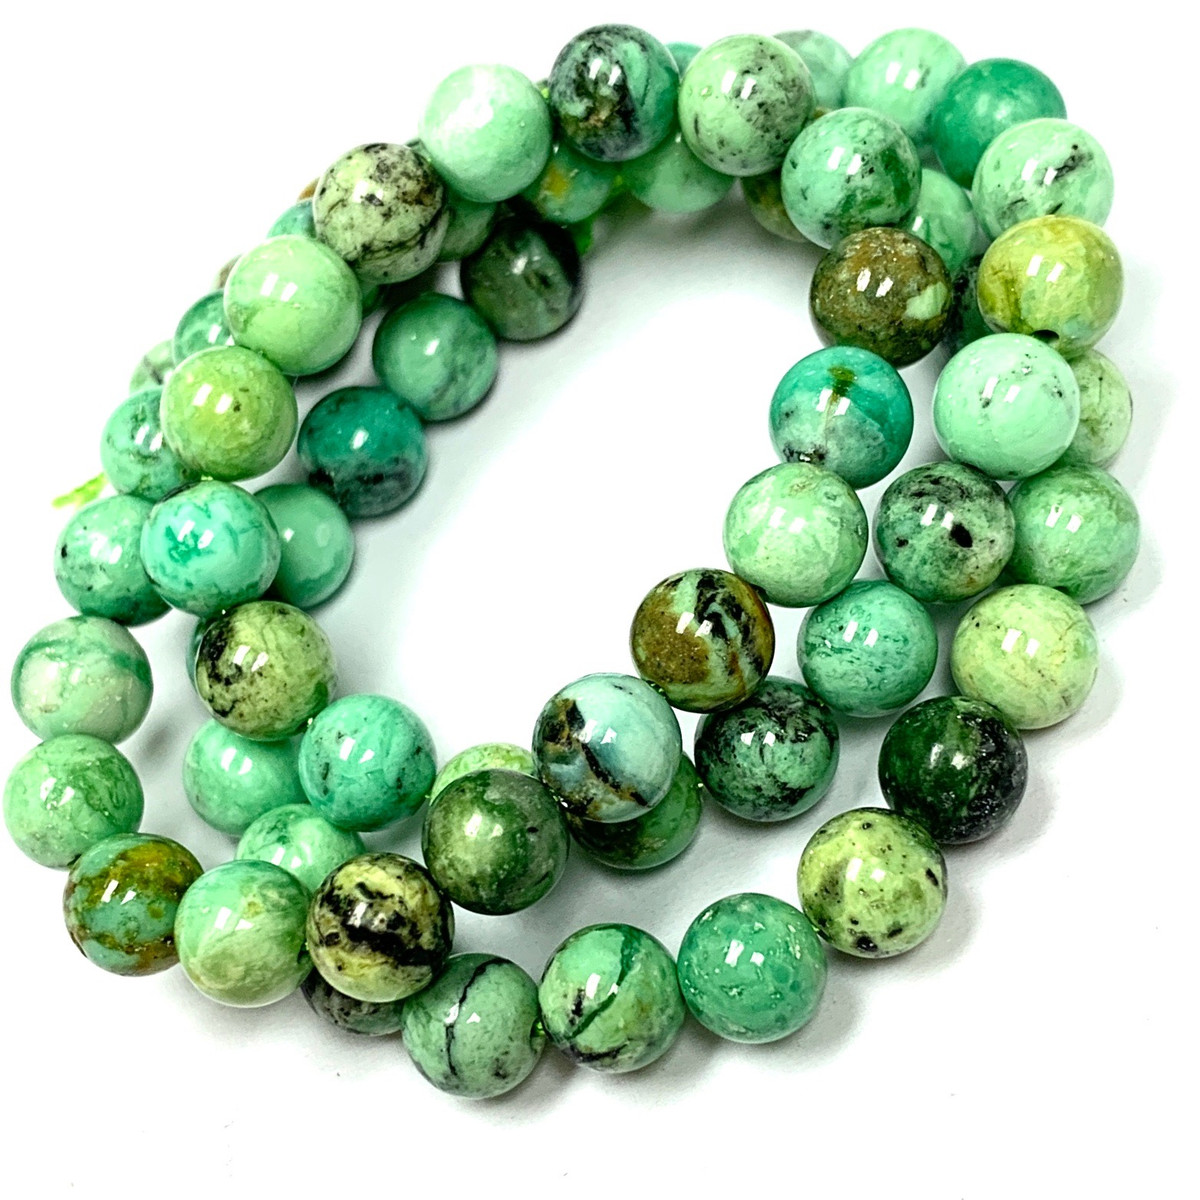 Highly Polished Green Variscite Round Beads-6mm (SP3238)